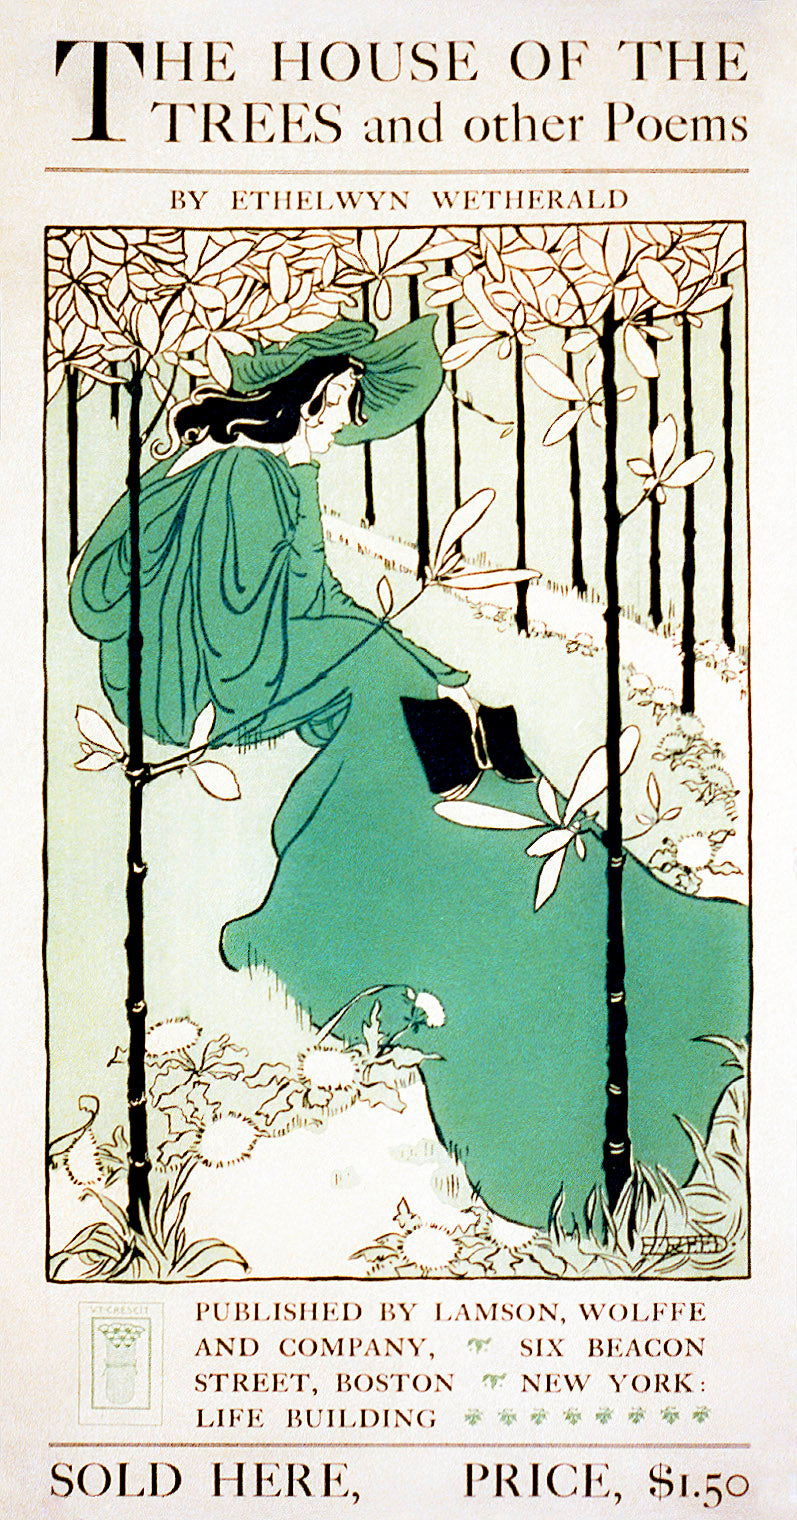 Ethel Reed Graphic Artworks [15 Images]